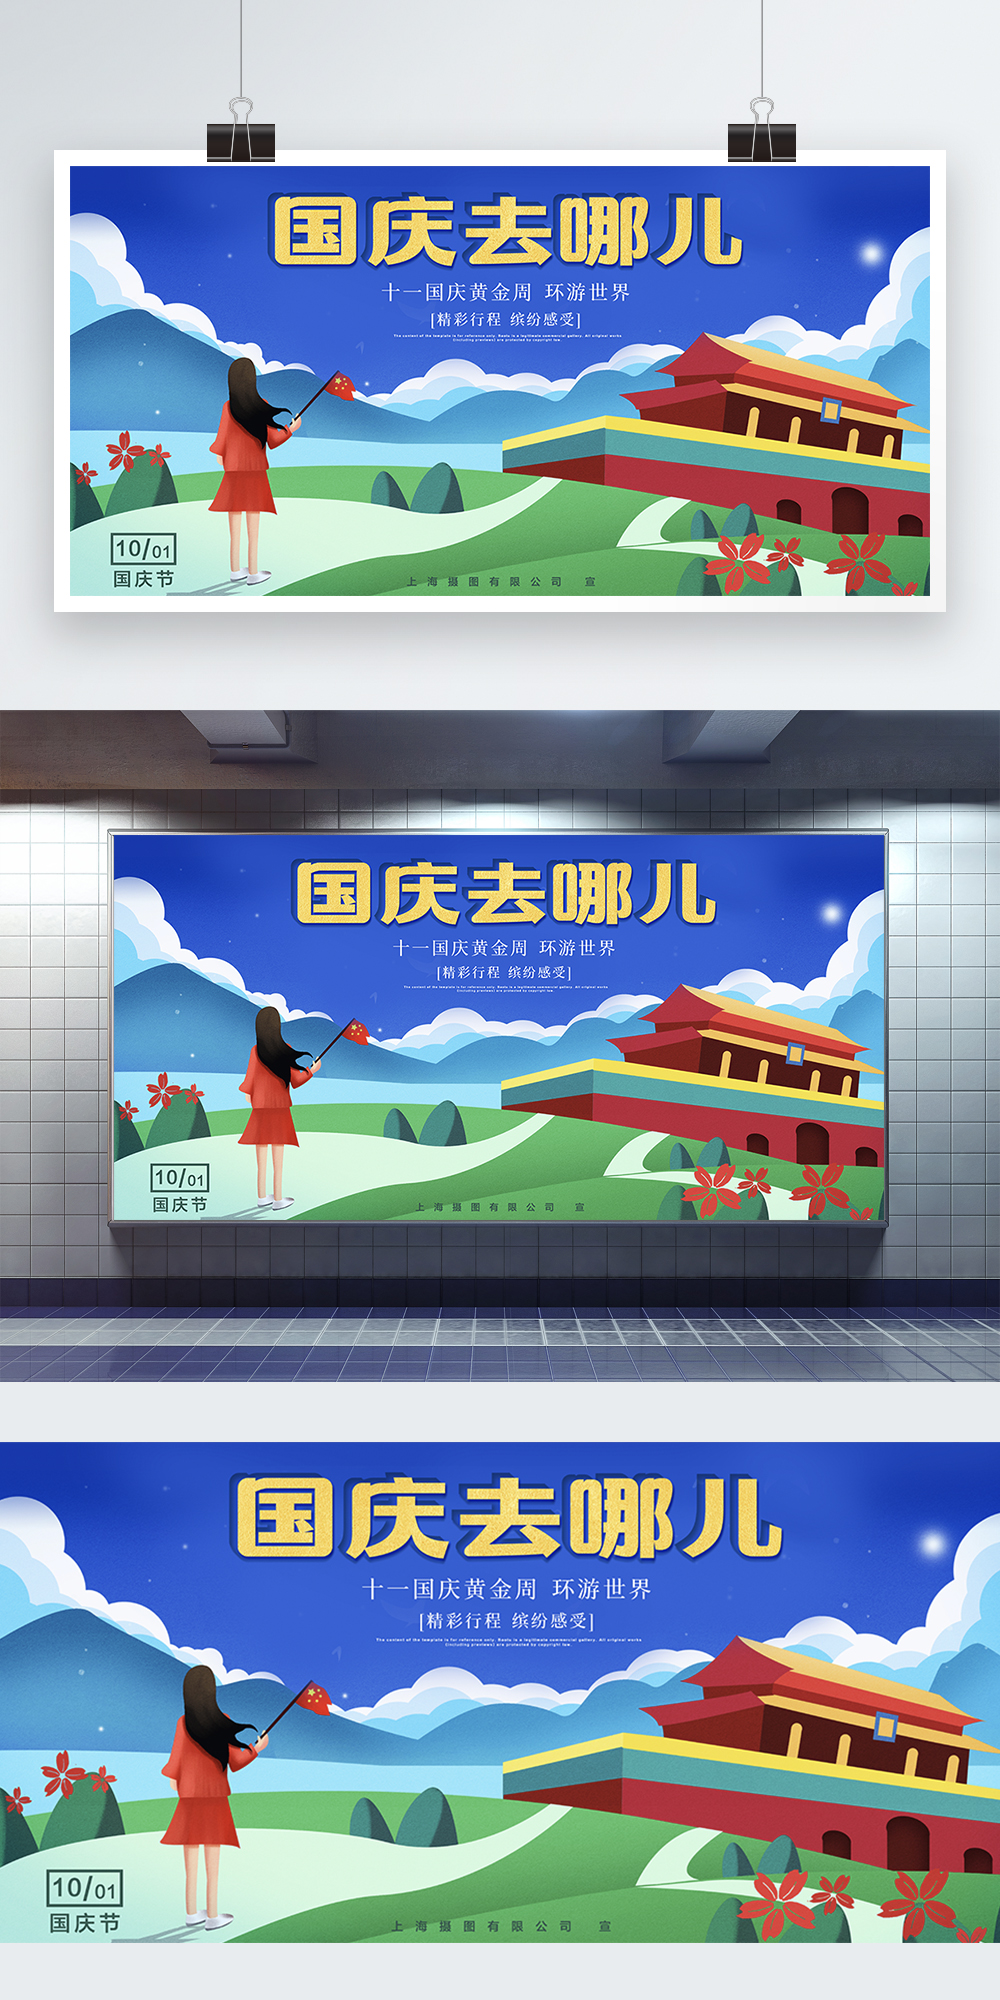 National day travel exhibition board template image_picture free